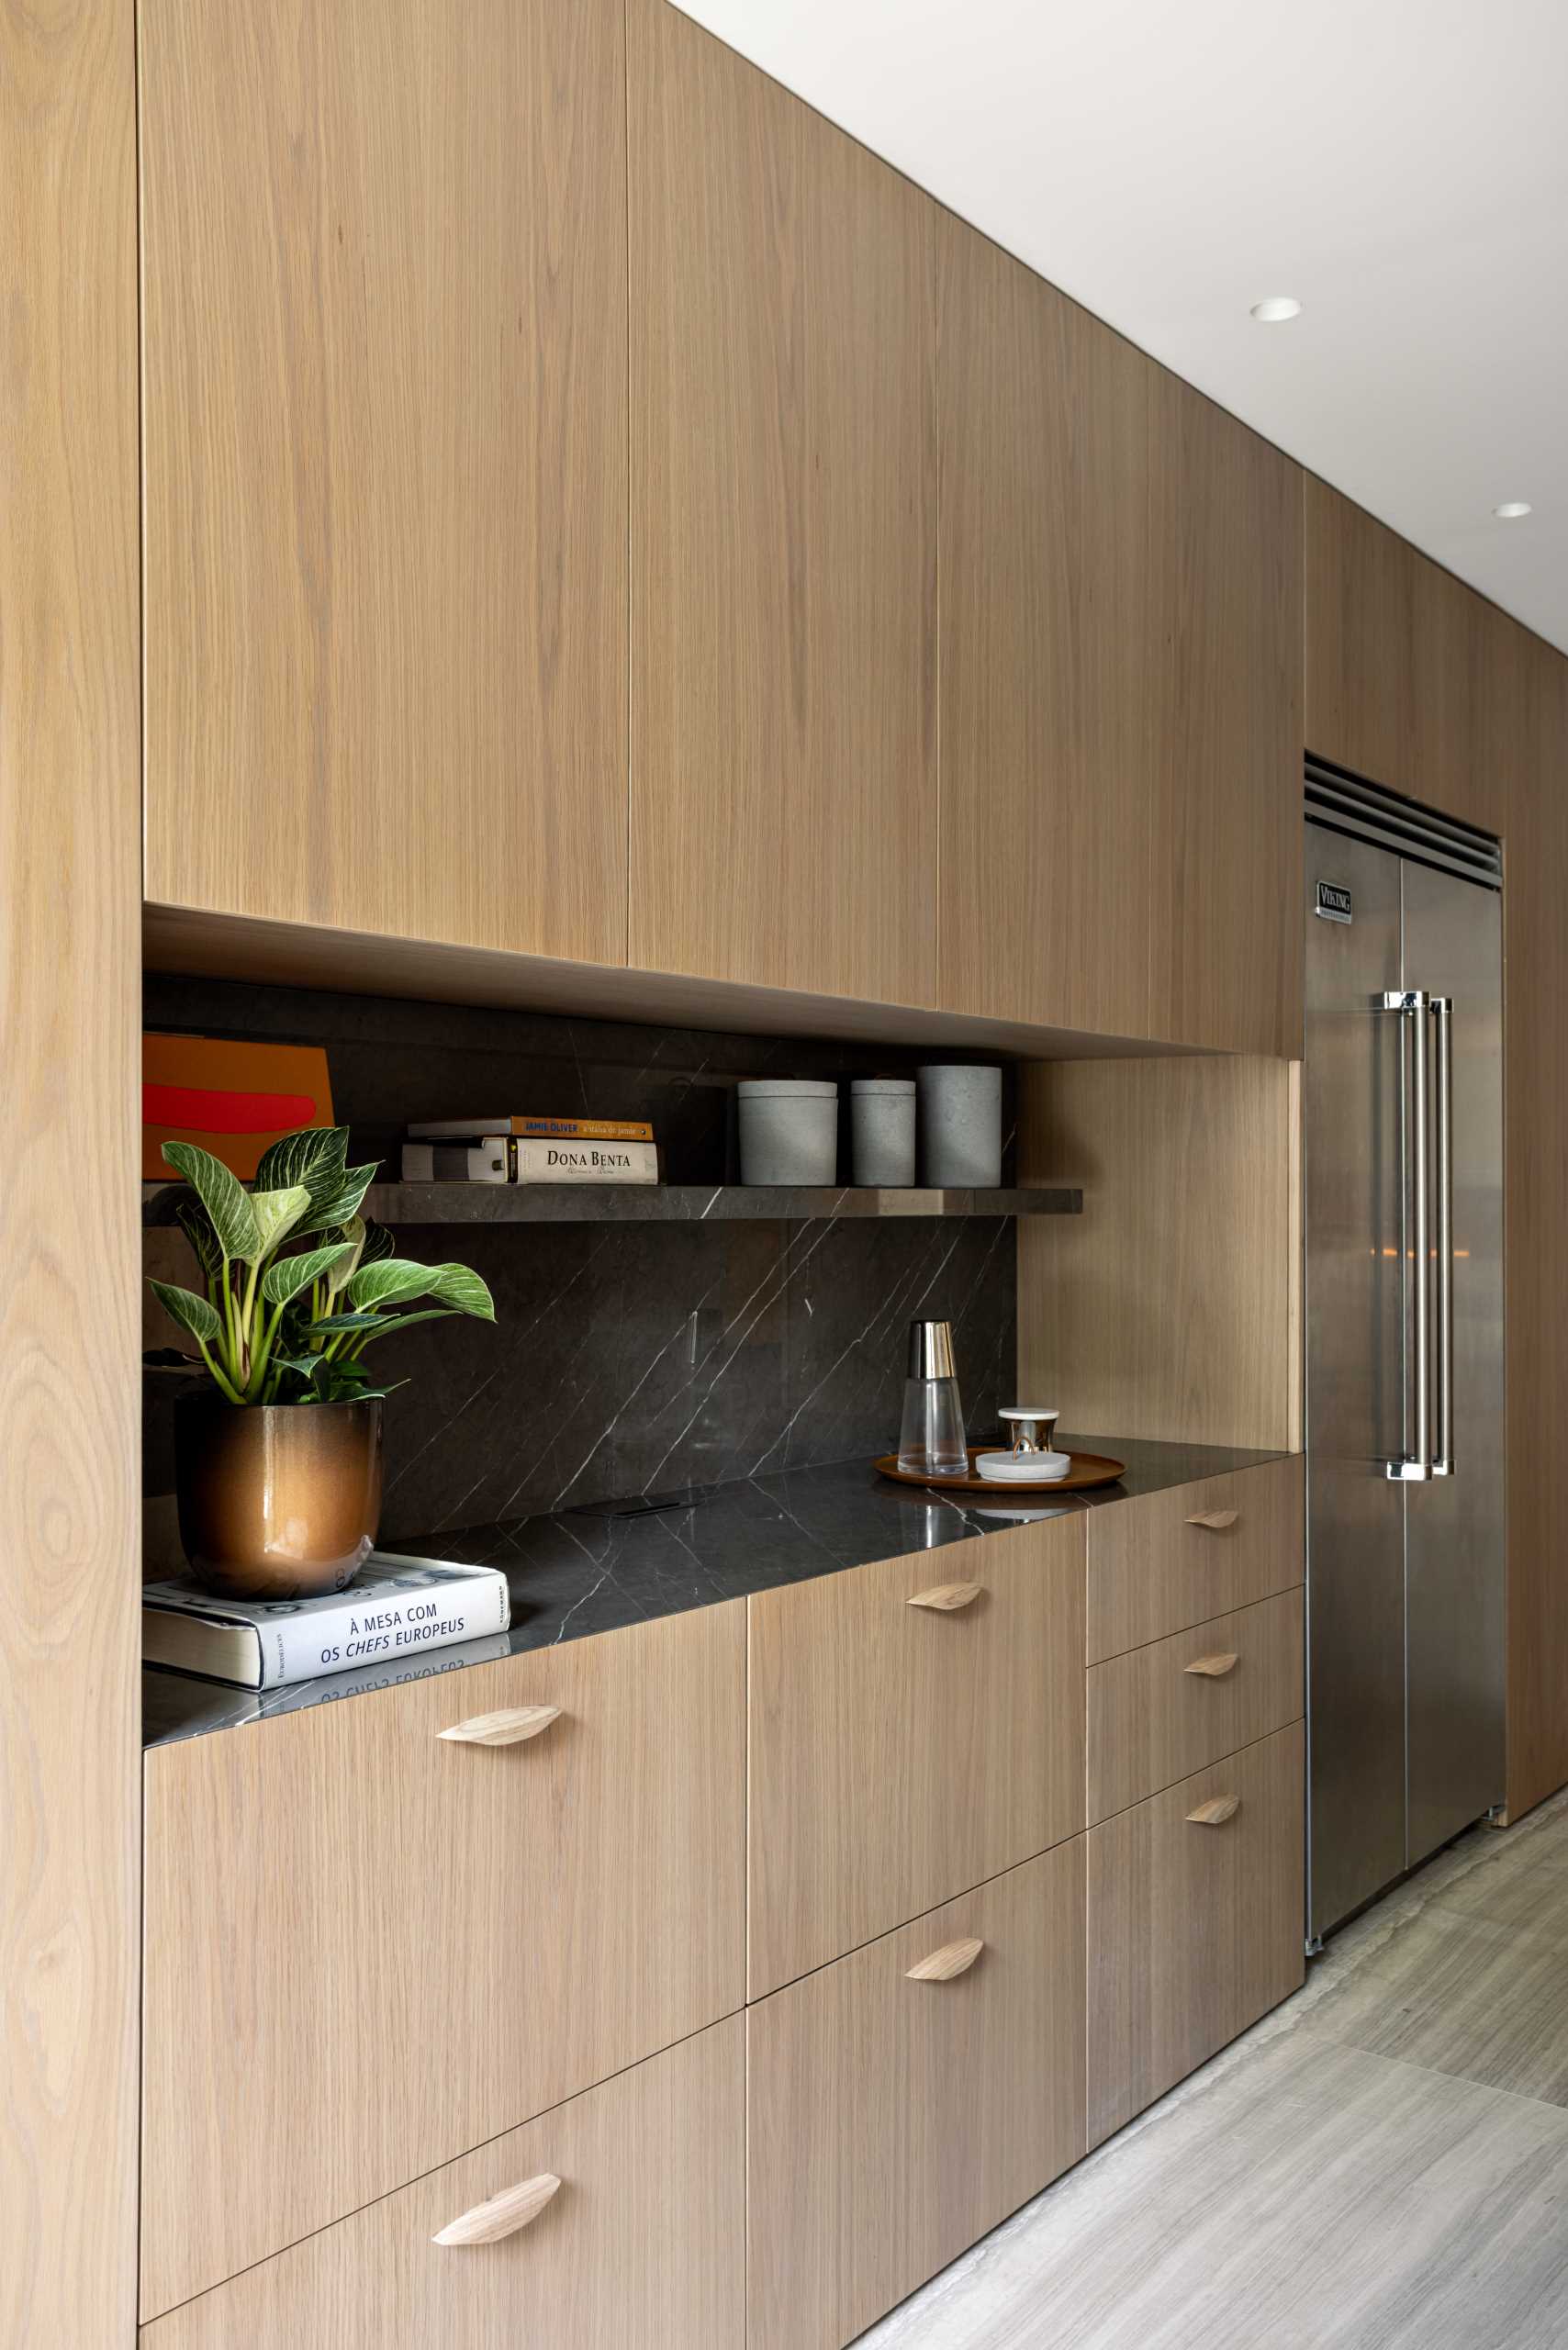 A modern kitchen with wood cabinets.